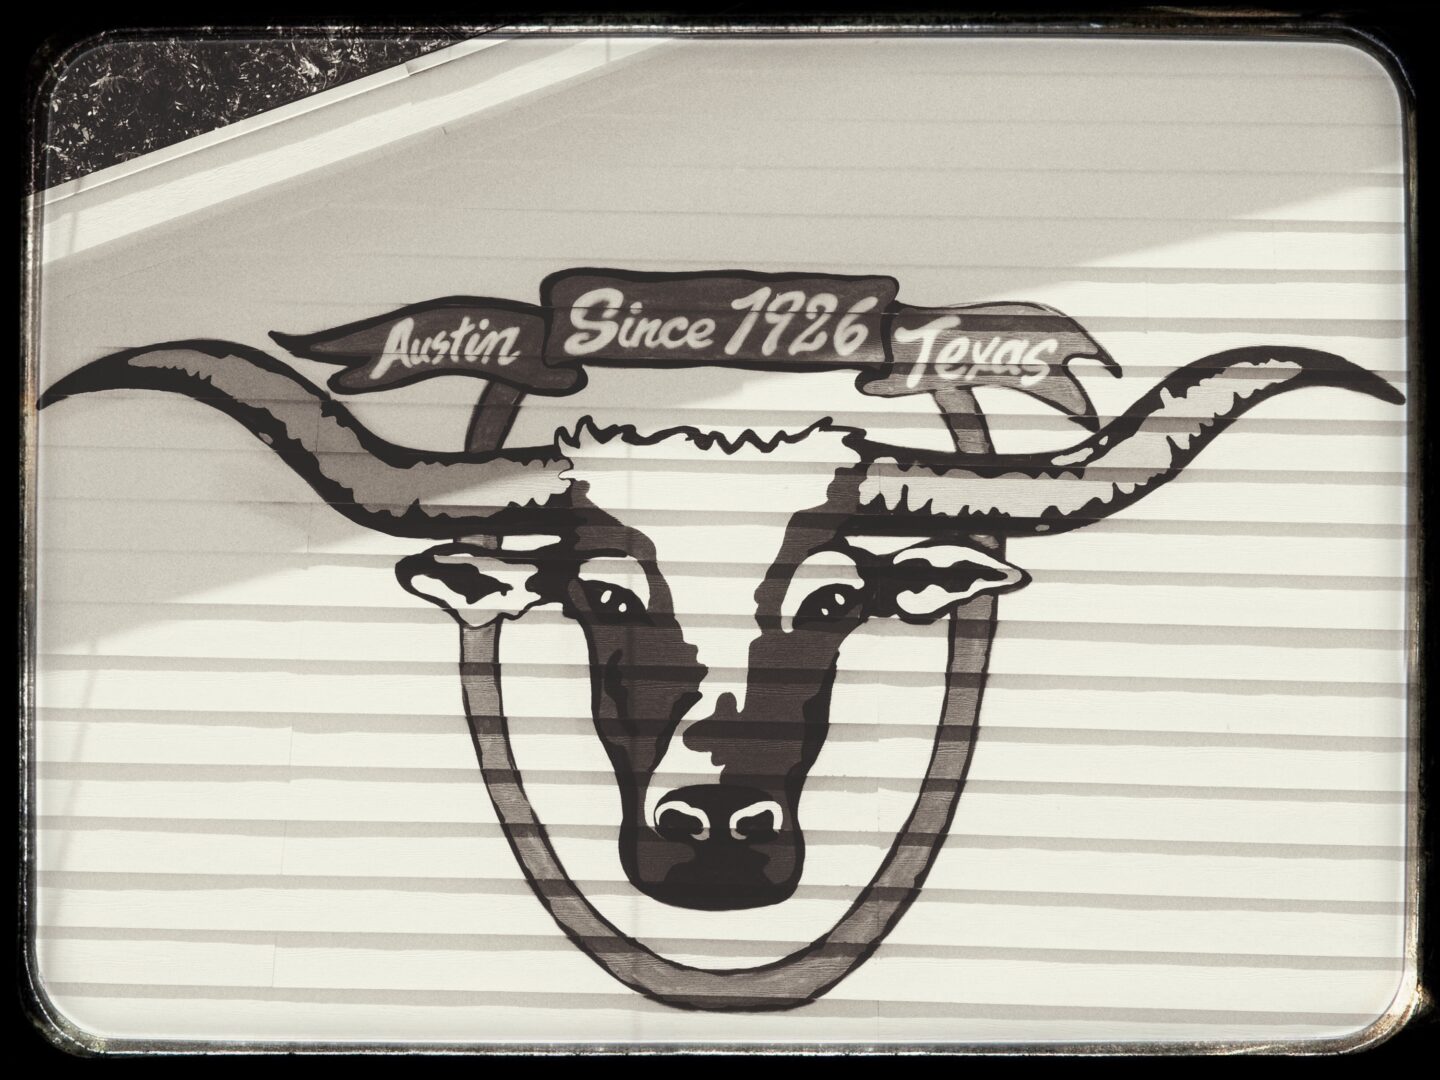 A cow with horns on the side of a building.